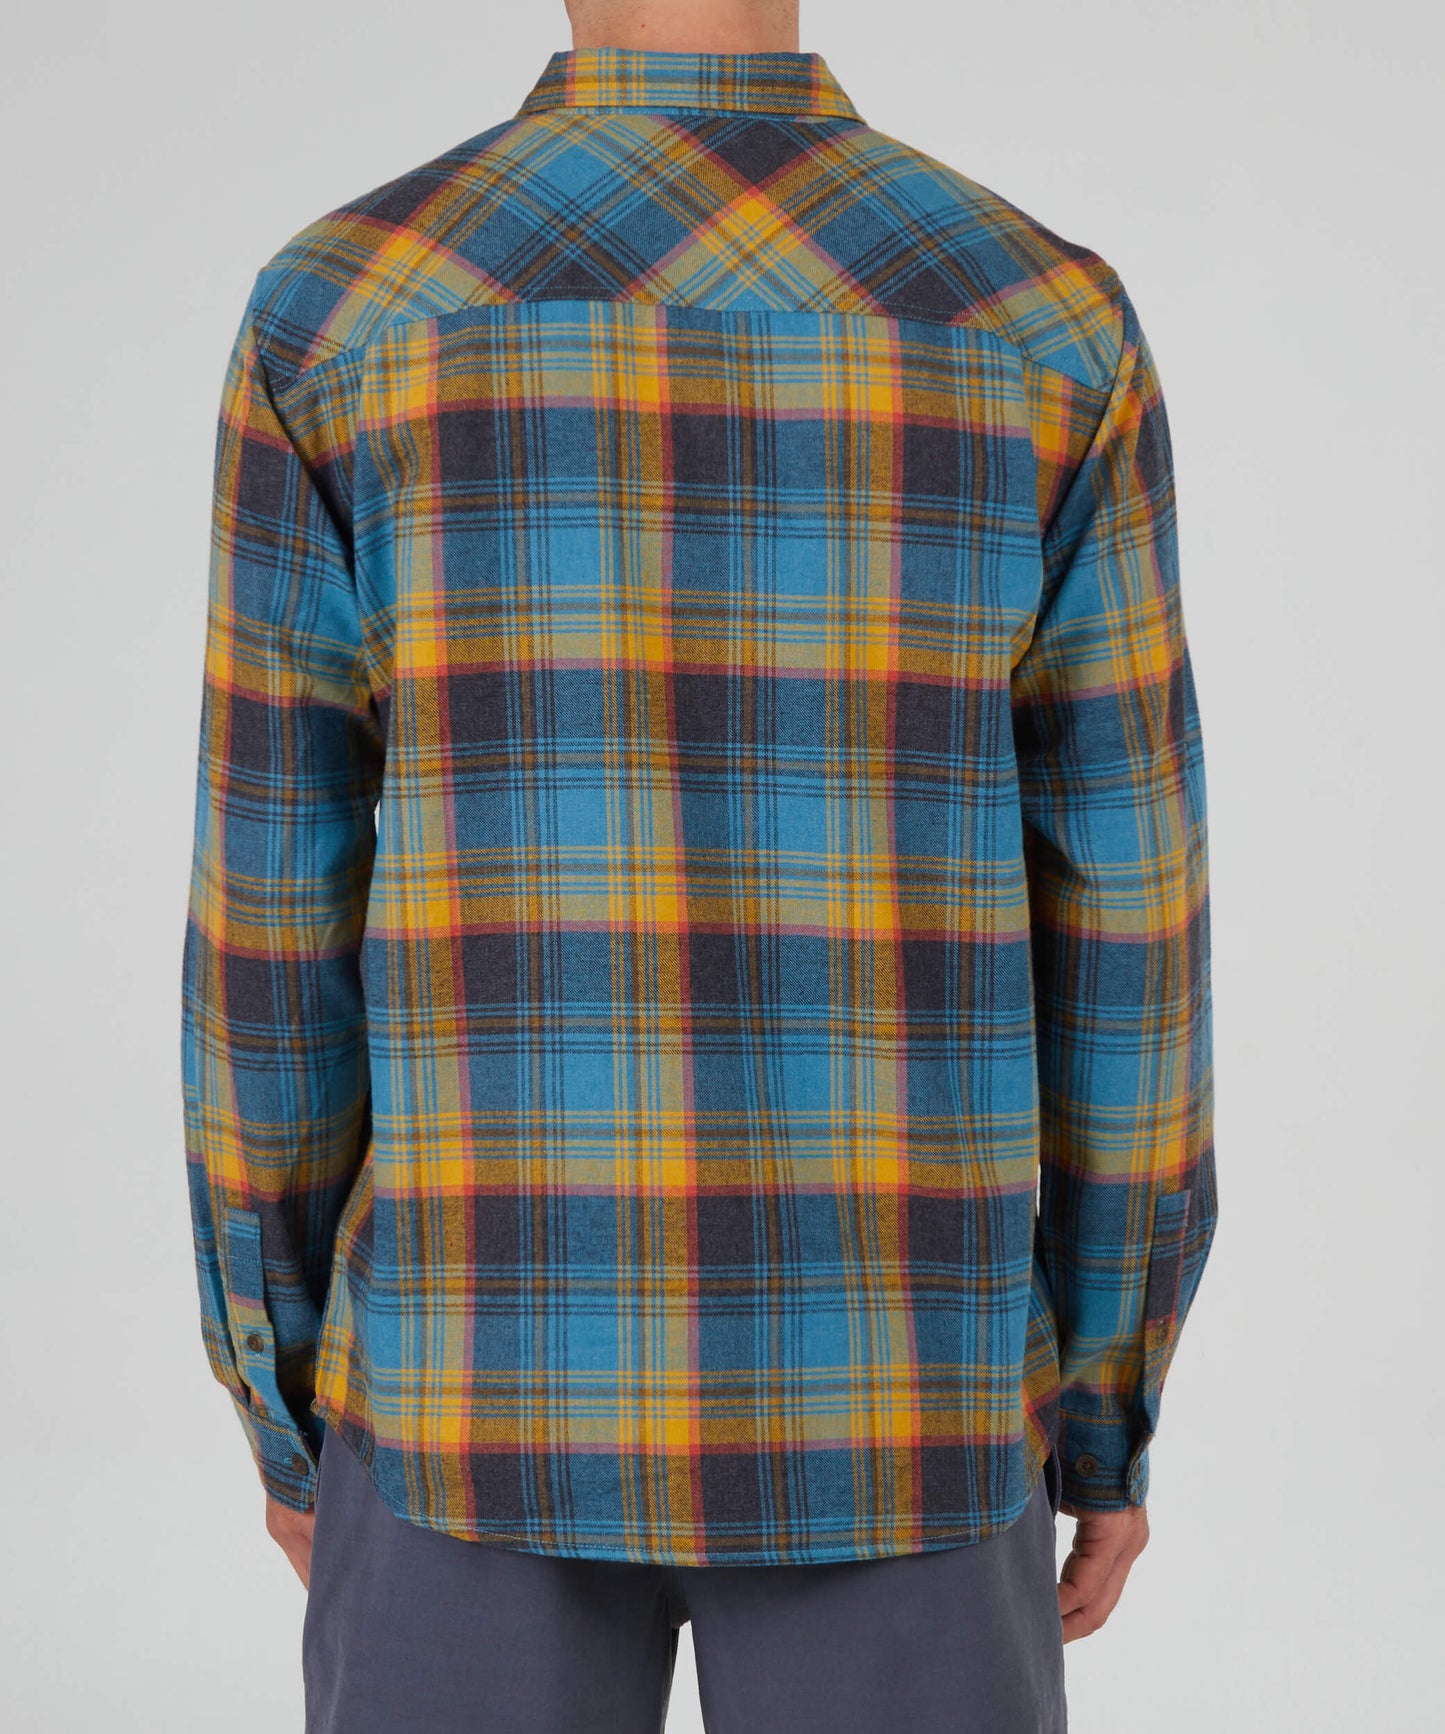 Salty crew WOVEN SHIRTS Frothing Flannel - Slate/Gold in Slate/Gold